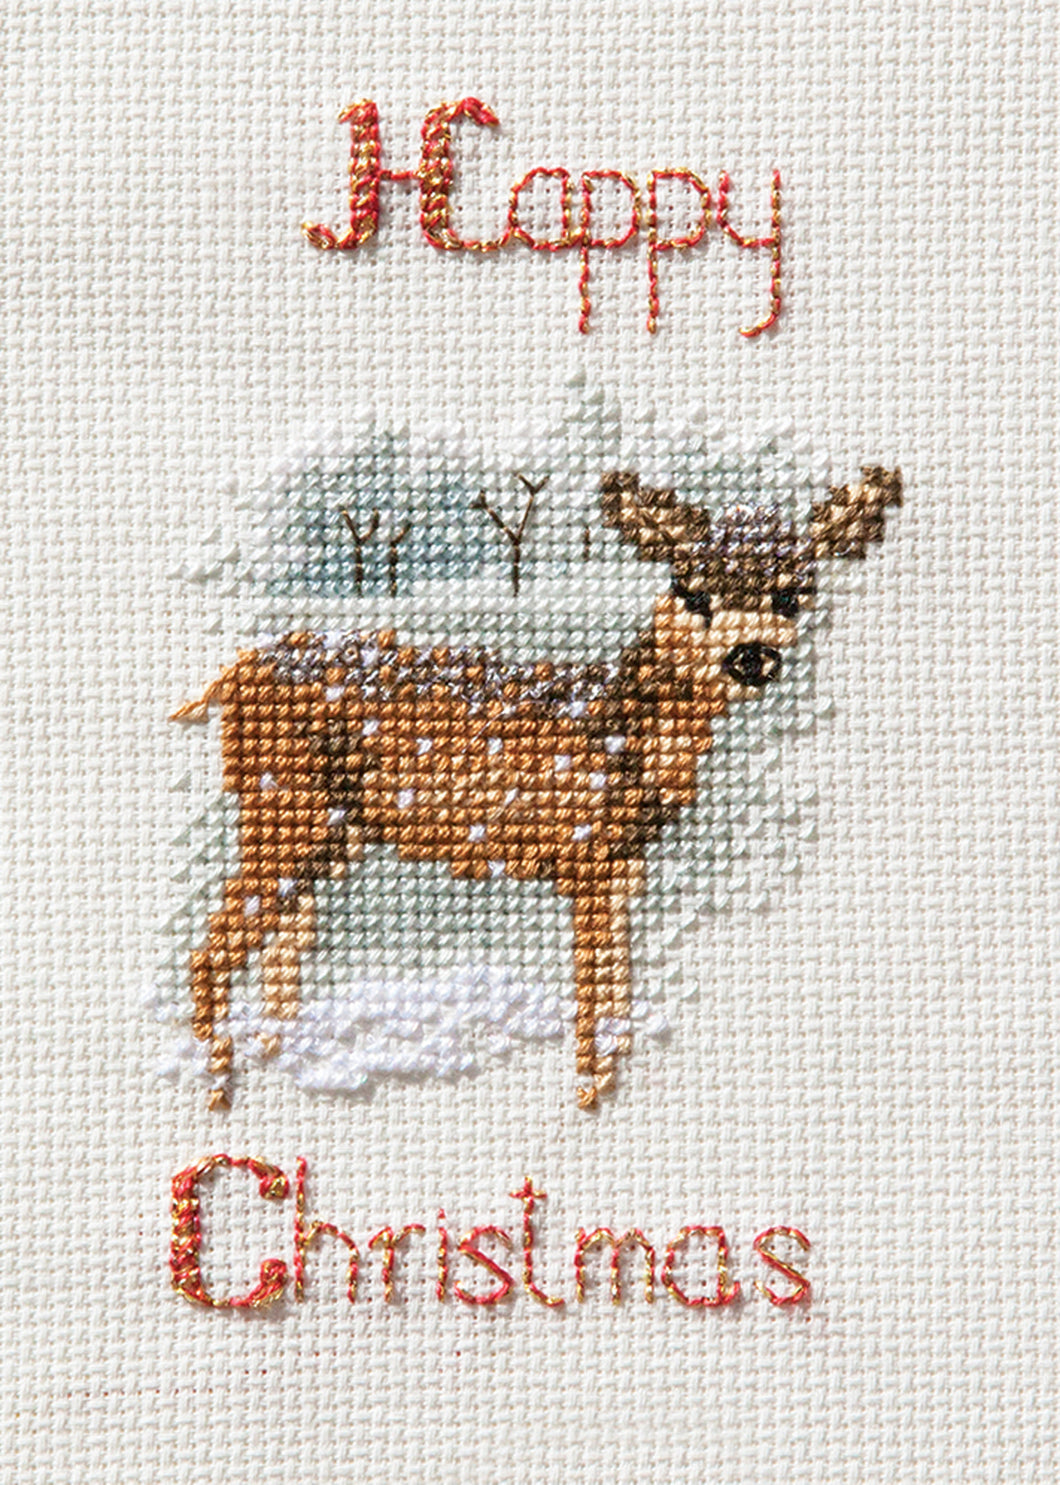 Deer in a Snowstorm - Christmas Card Cross Stitch Kit